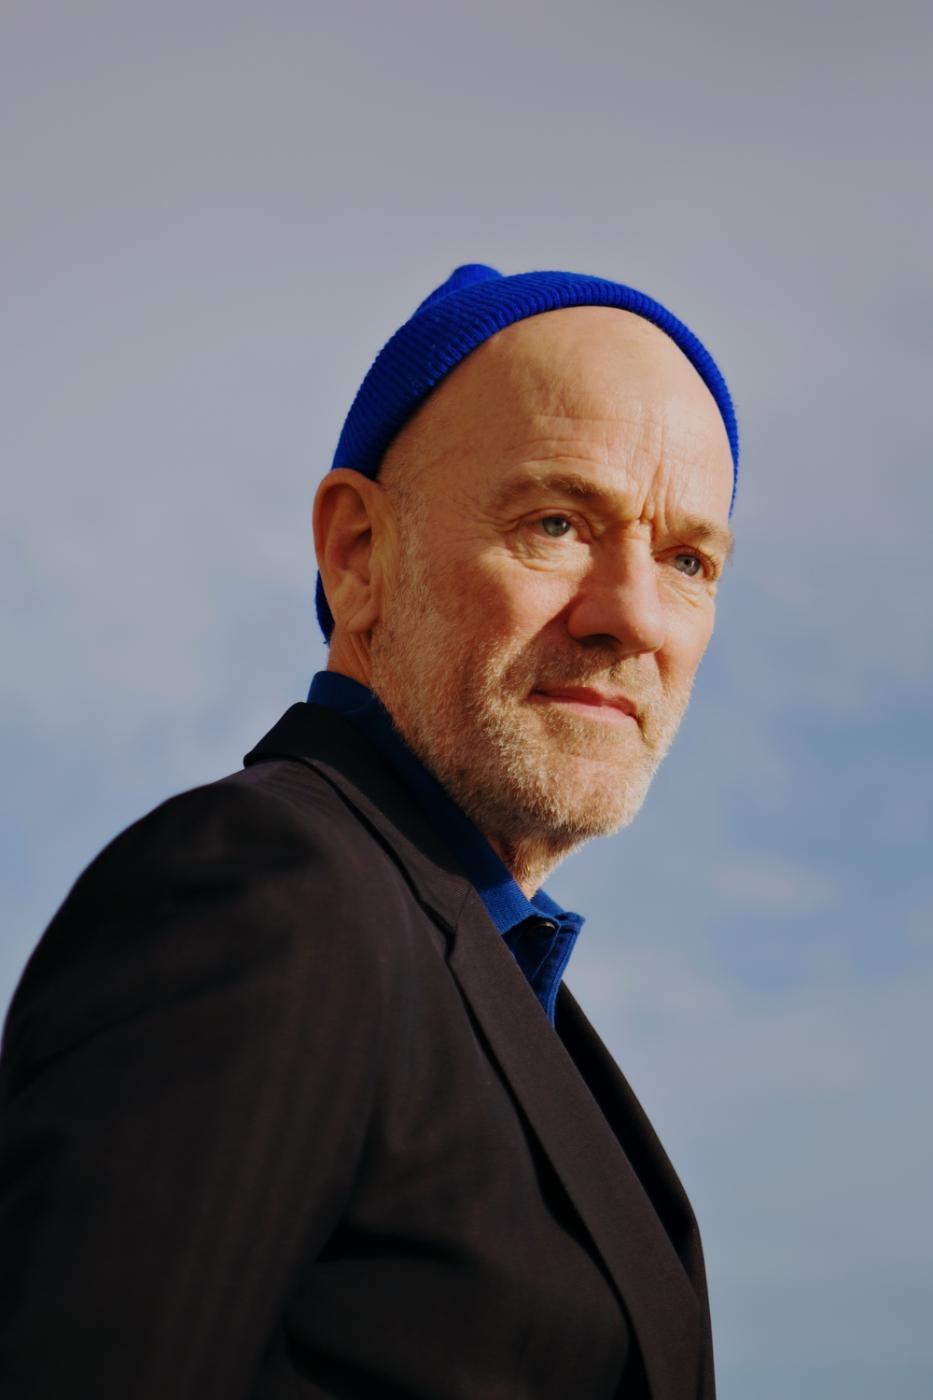 Michael Stipe for the New Yorker